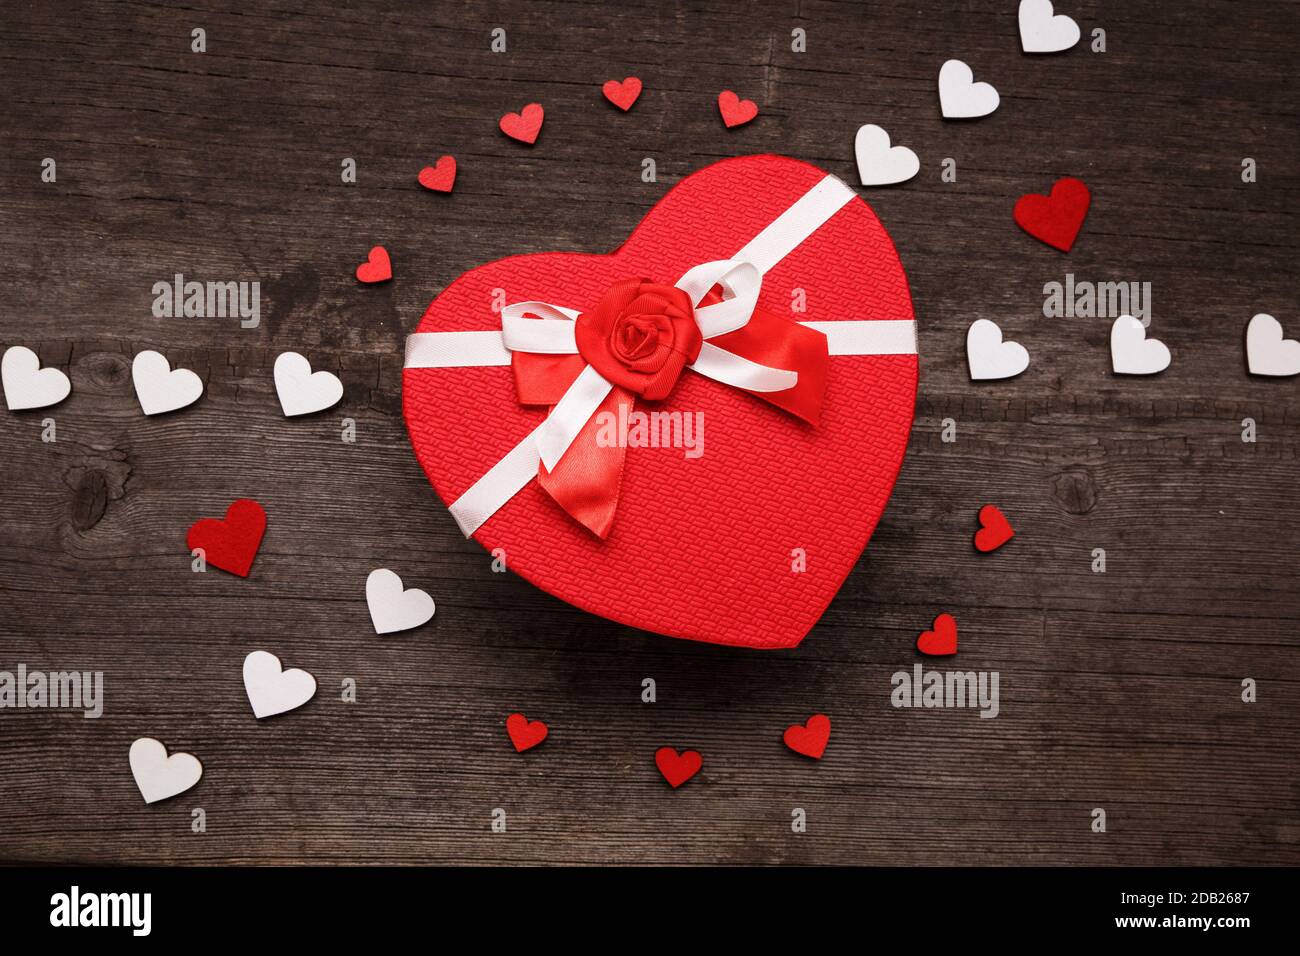 The cover of the box in the shape of a heart. Composition with red and white hearts on a wooden background. Valentines day concept with hearts and gif Stock Photo